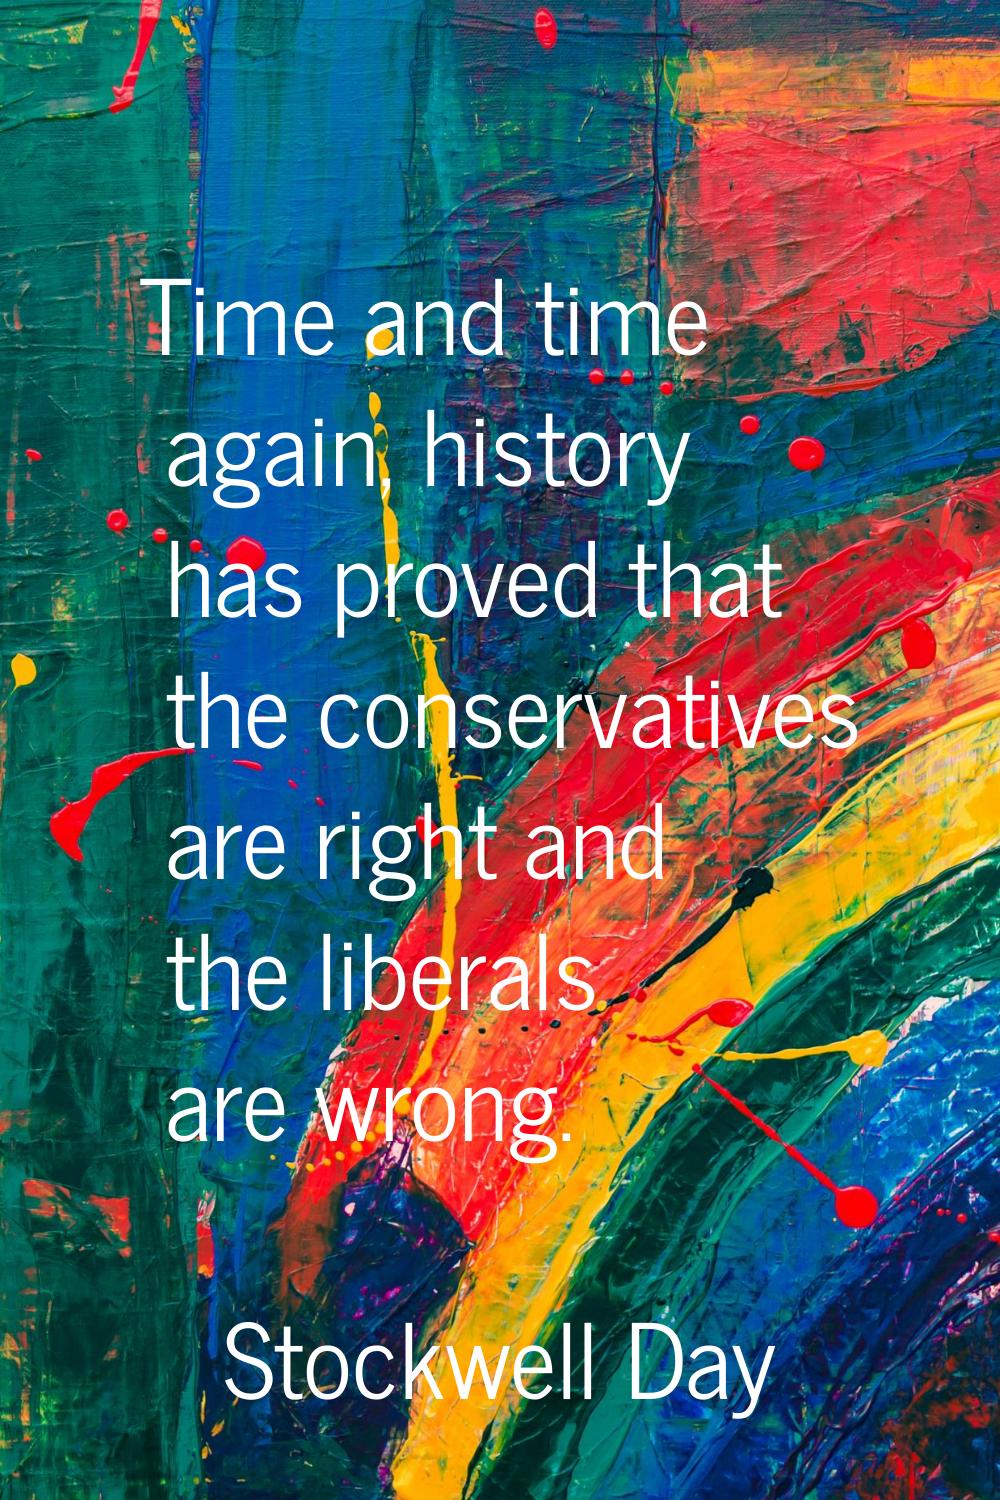 Time and time again, history has proved that the conservatives are right and the liberals are wrong